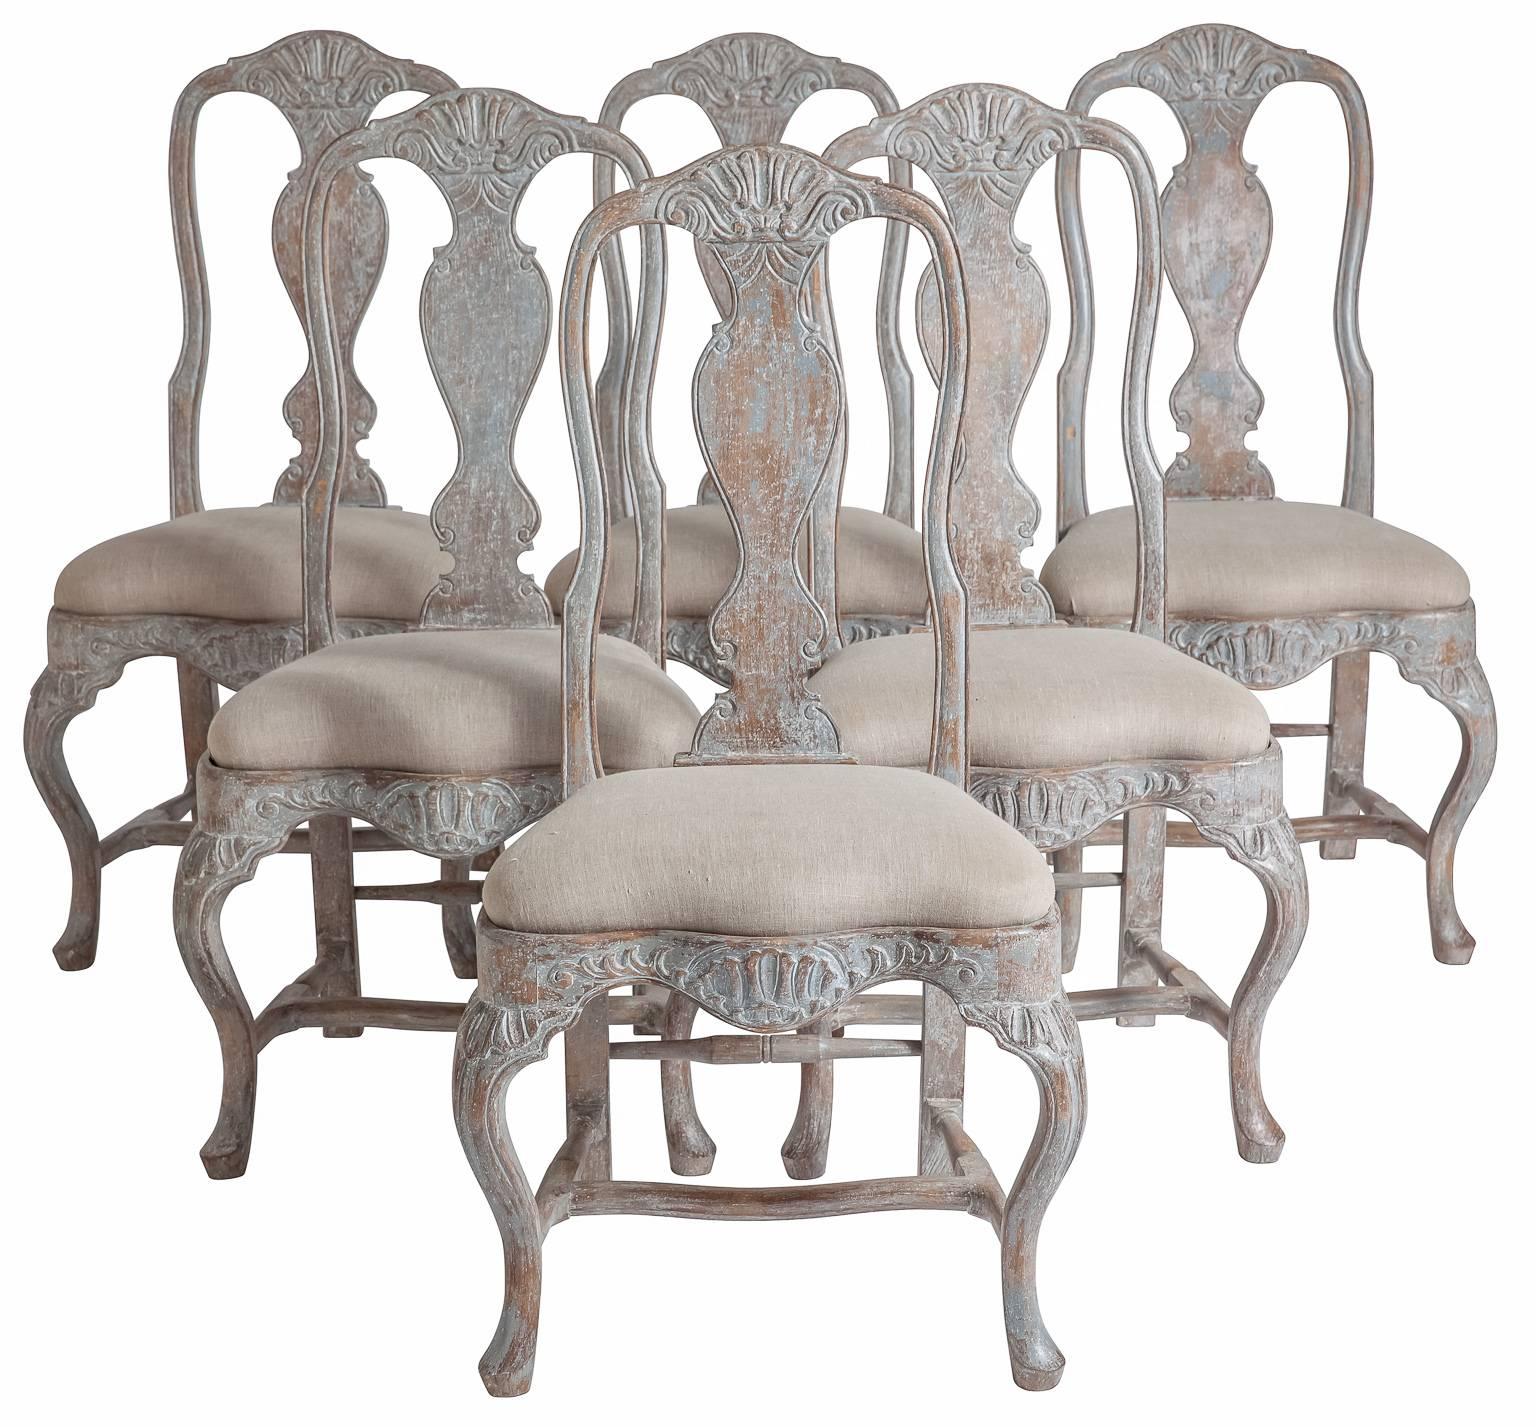 Set of Six Swedish Rococo Style Dining Chairs, Late 19th Century